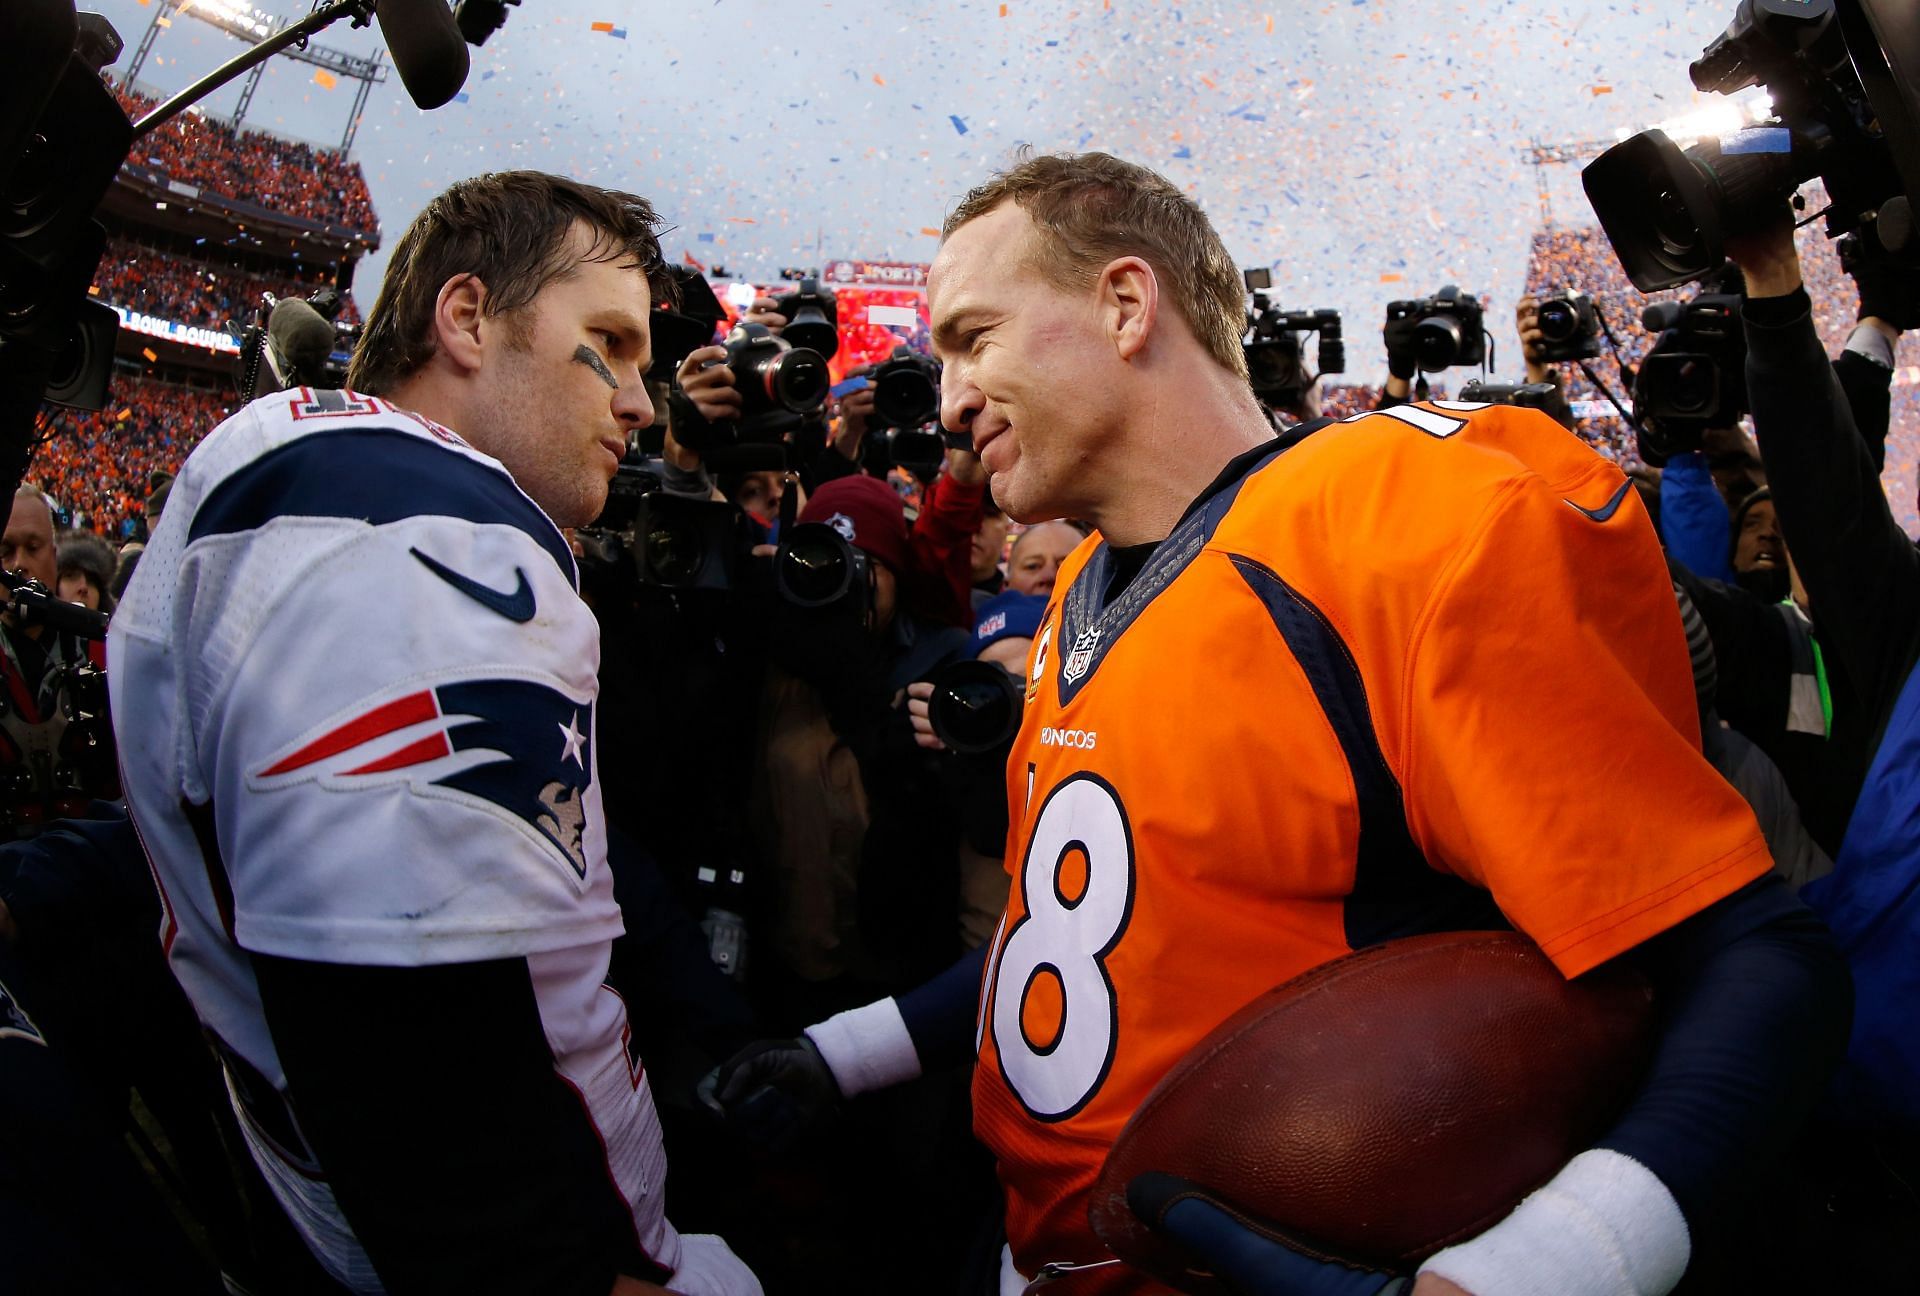 Brady and Manning after their final postseason meeting in 2016 (Photo: Getty)